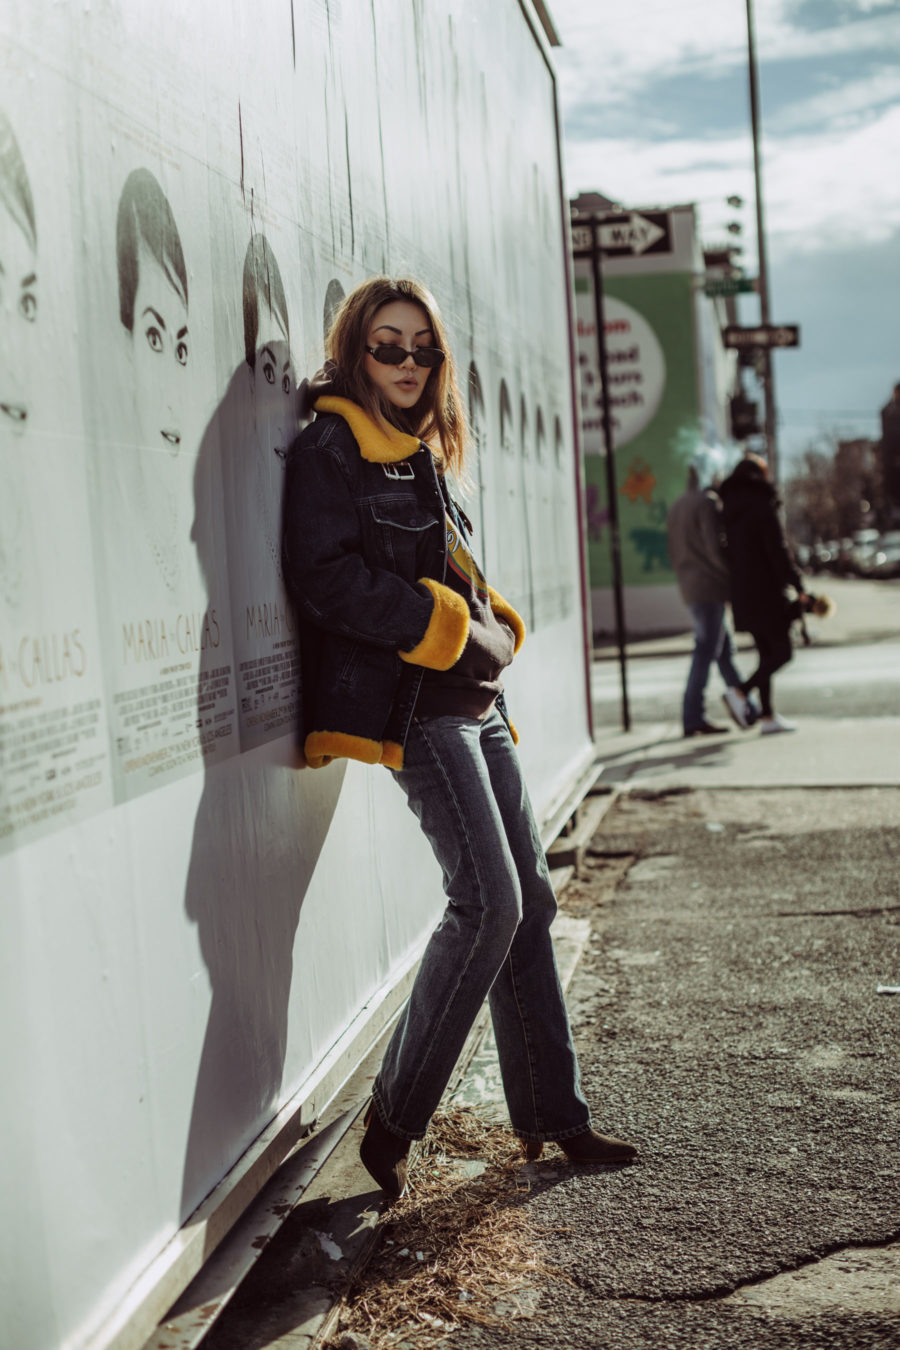 fashion blogger jessica wang shares ugly fashion trends of 2020 wearing long denim and shearling jacket // Notjessfashion.com